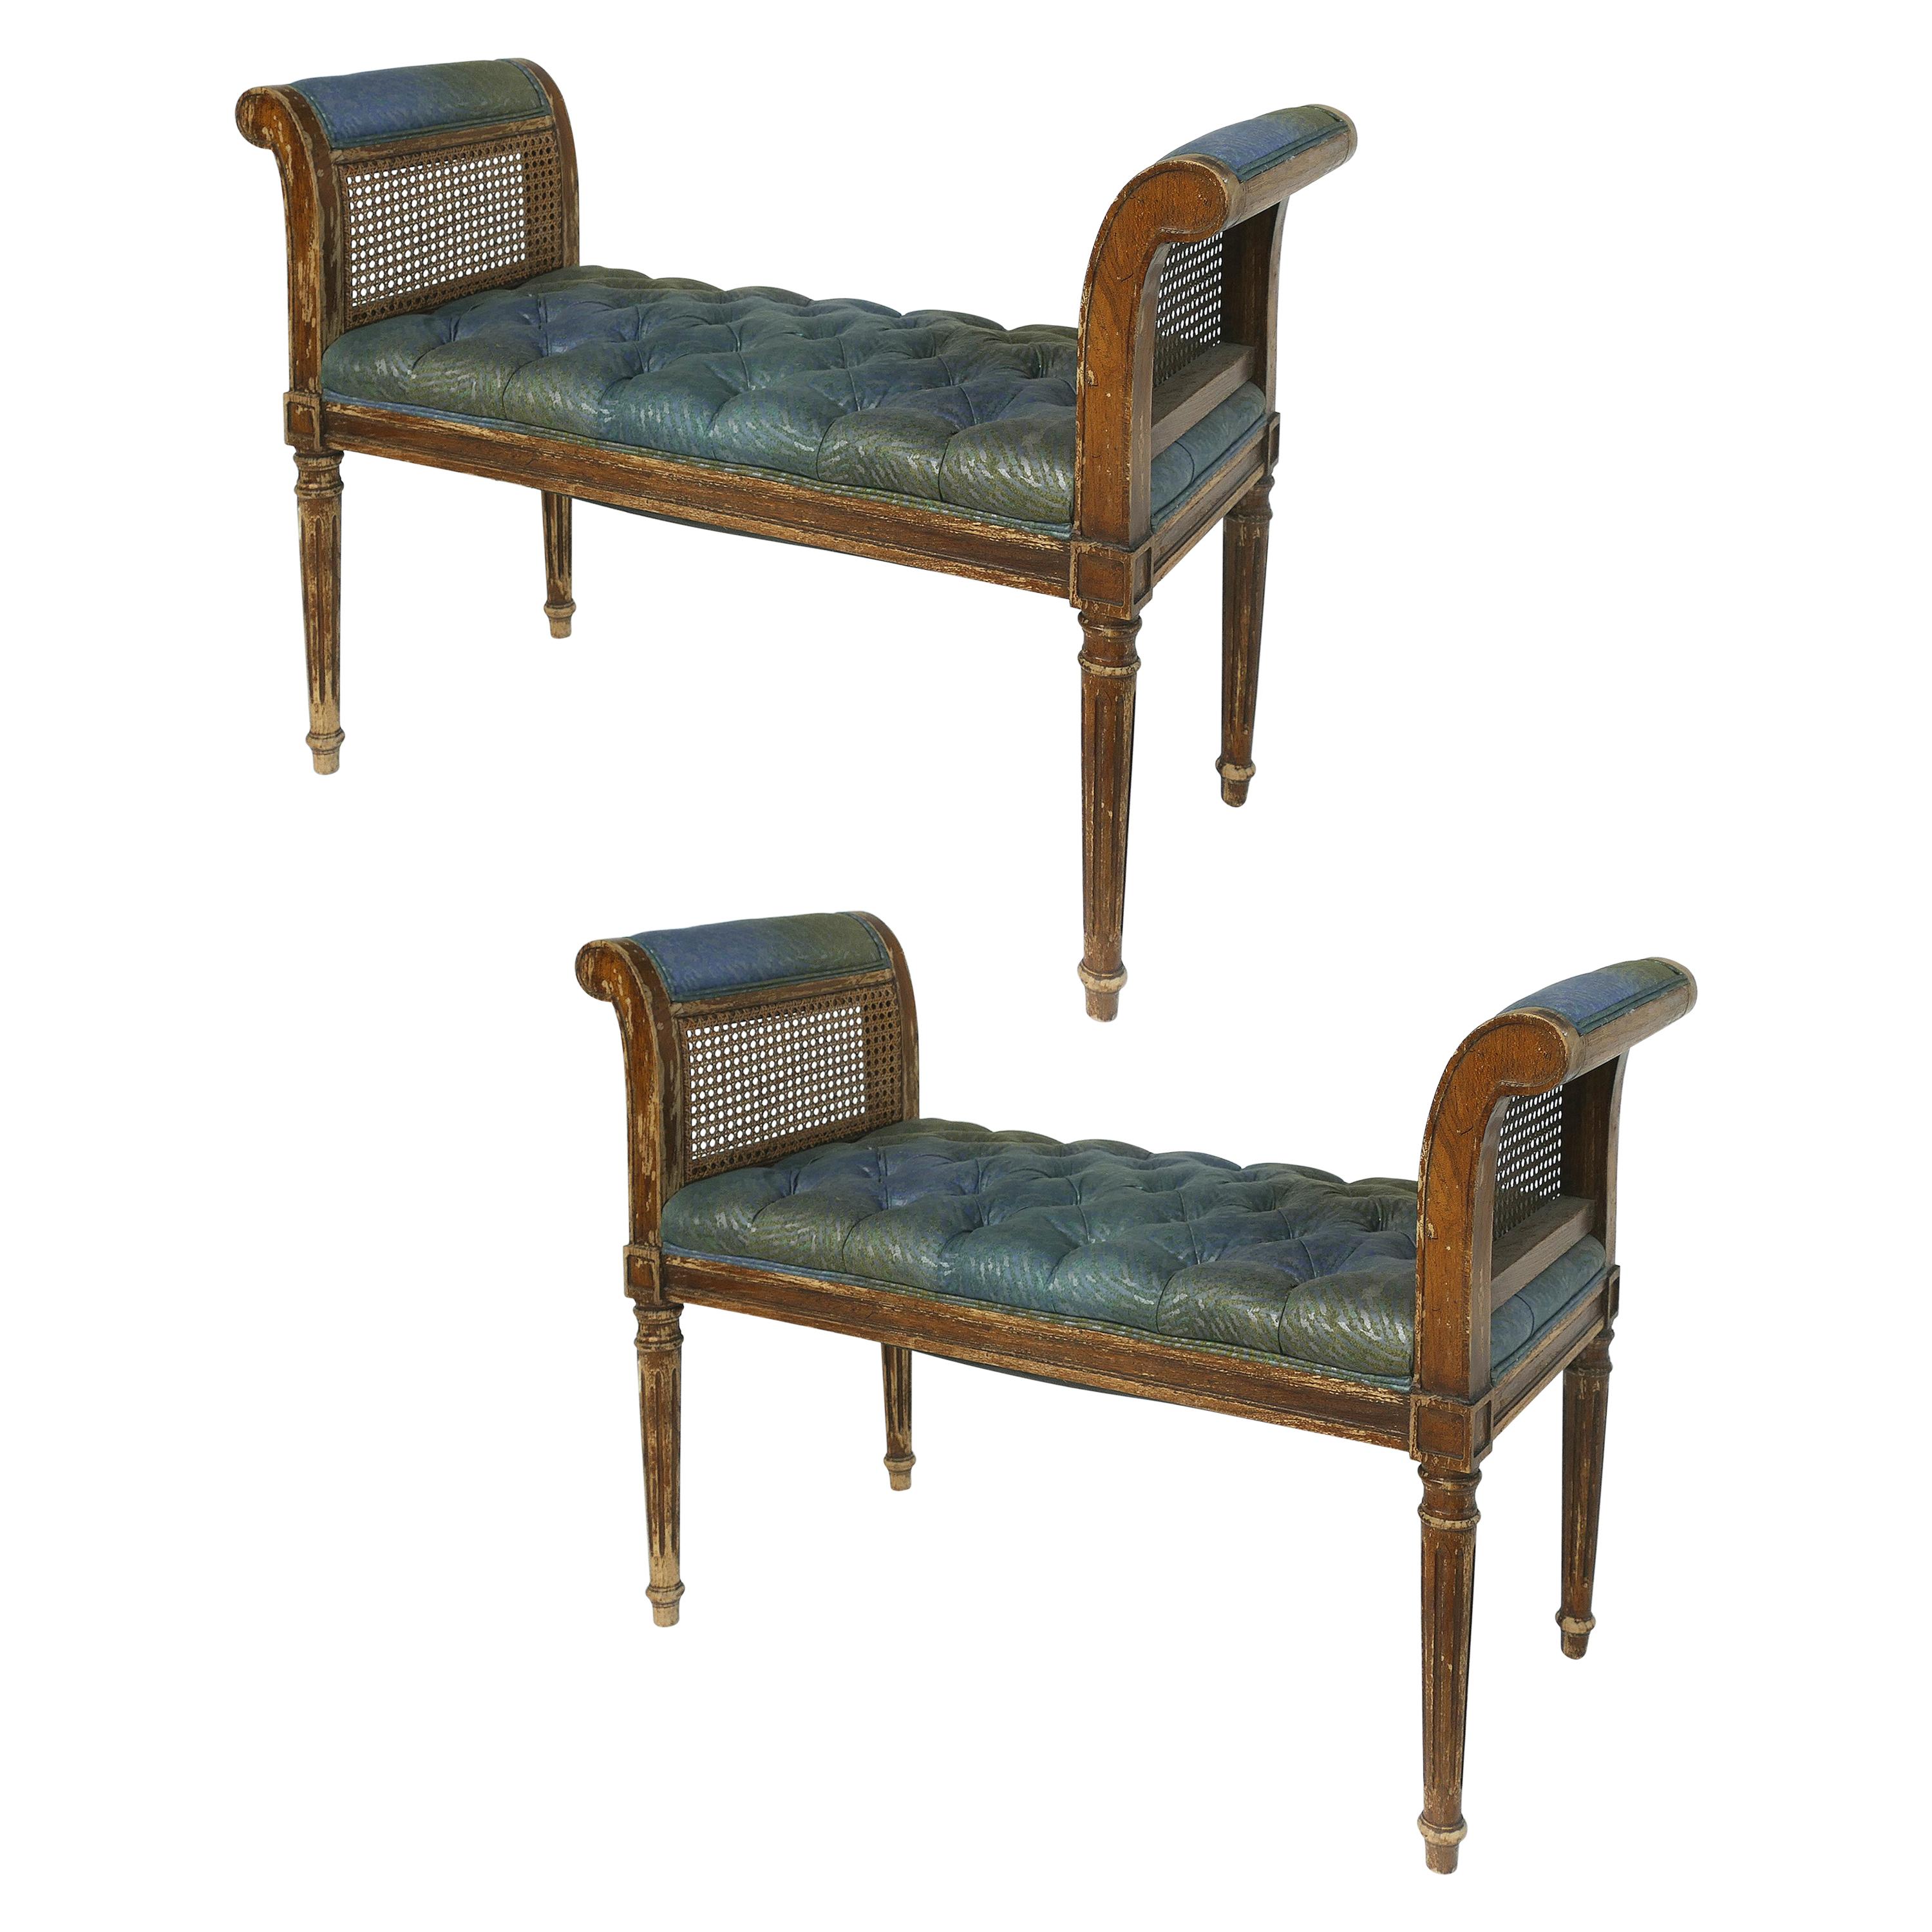 19th Century Louis XVI Style Caned Benches with Tufted Seats